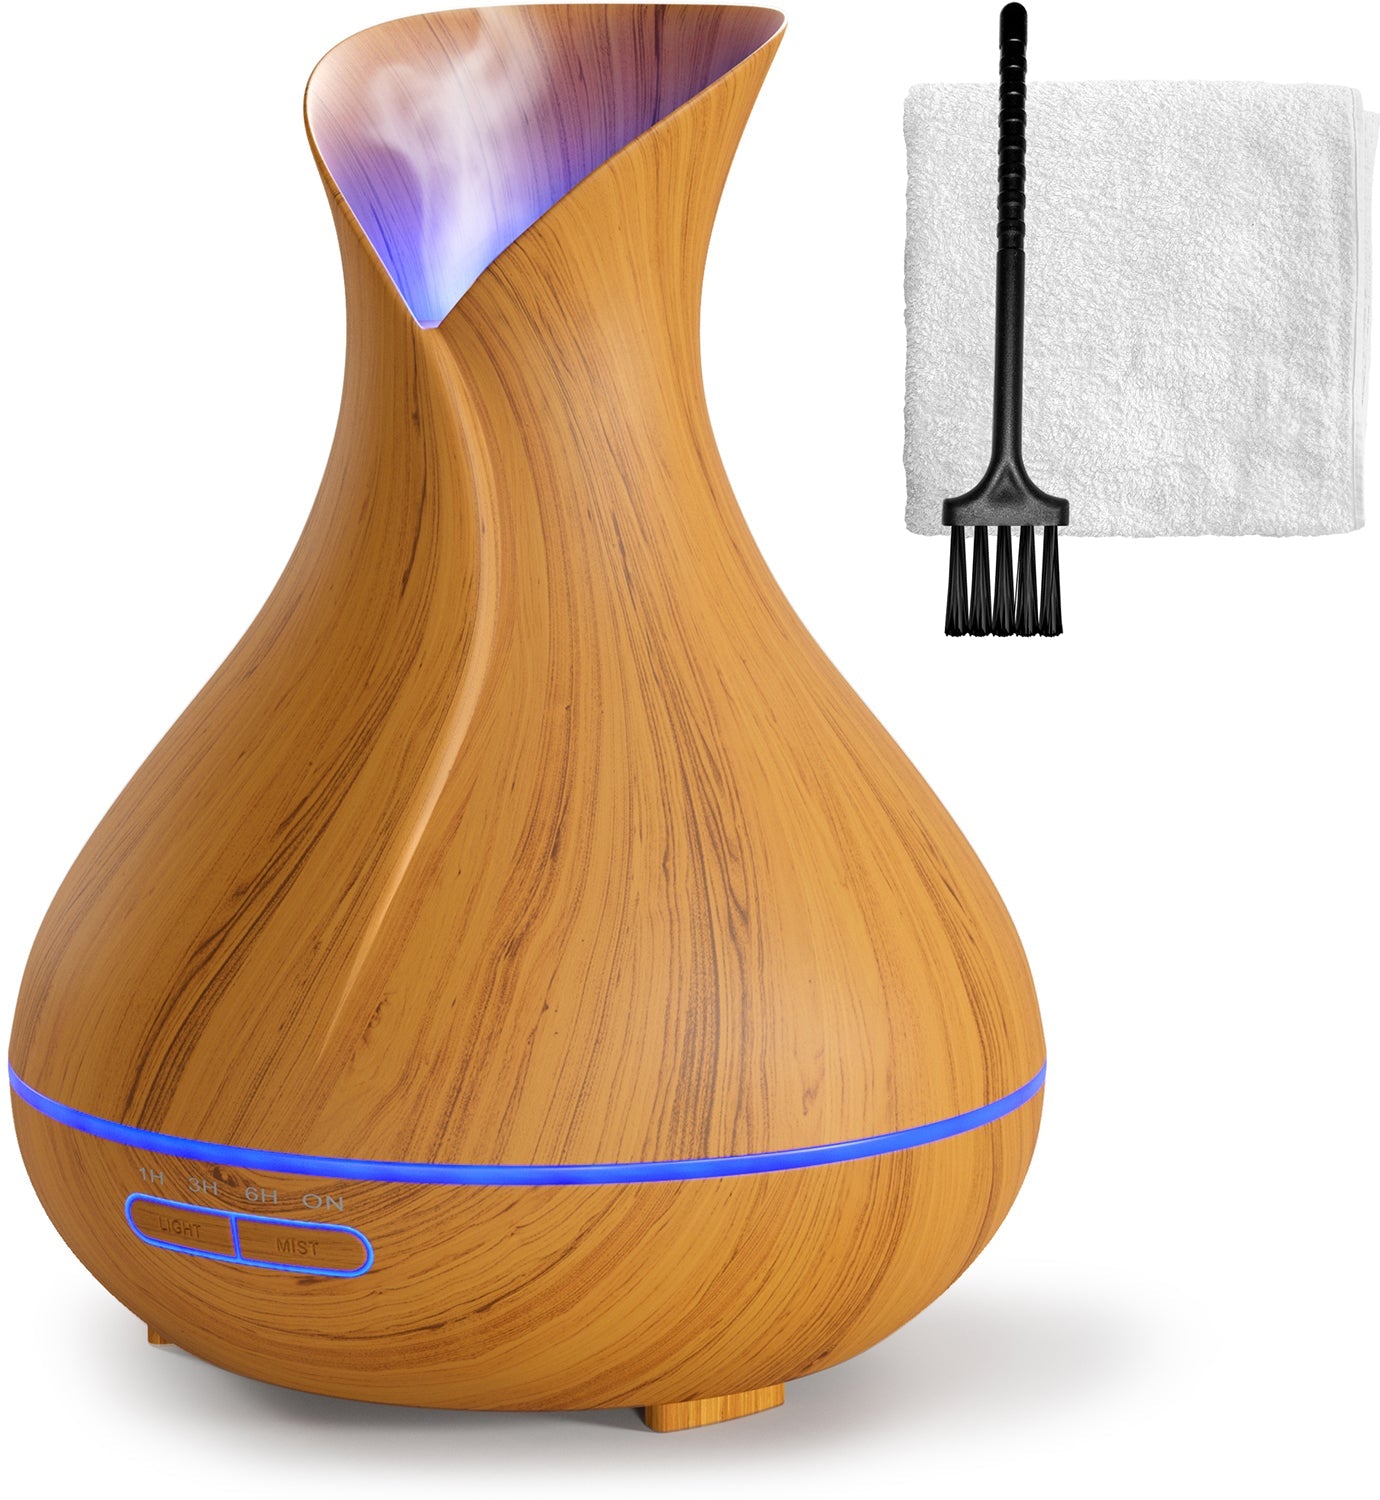 Upper Echelon Products: Aromatherapy Oil Diffuser